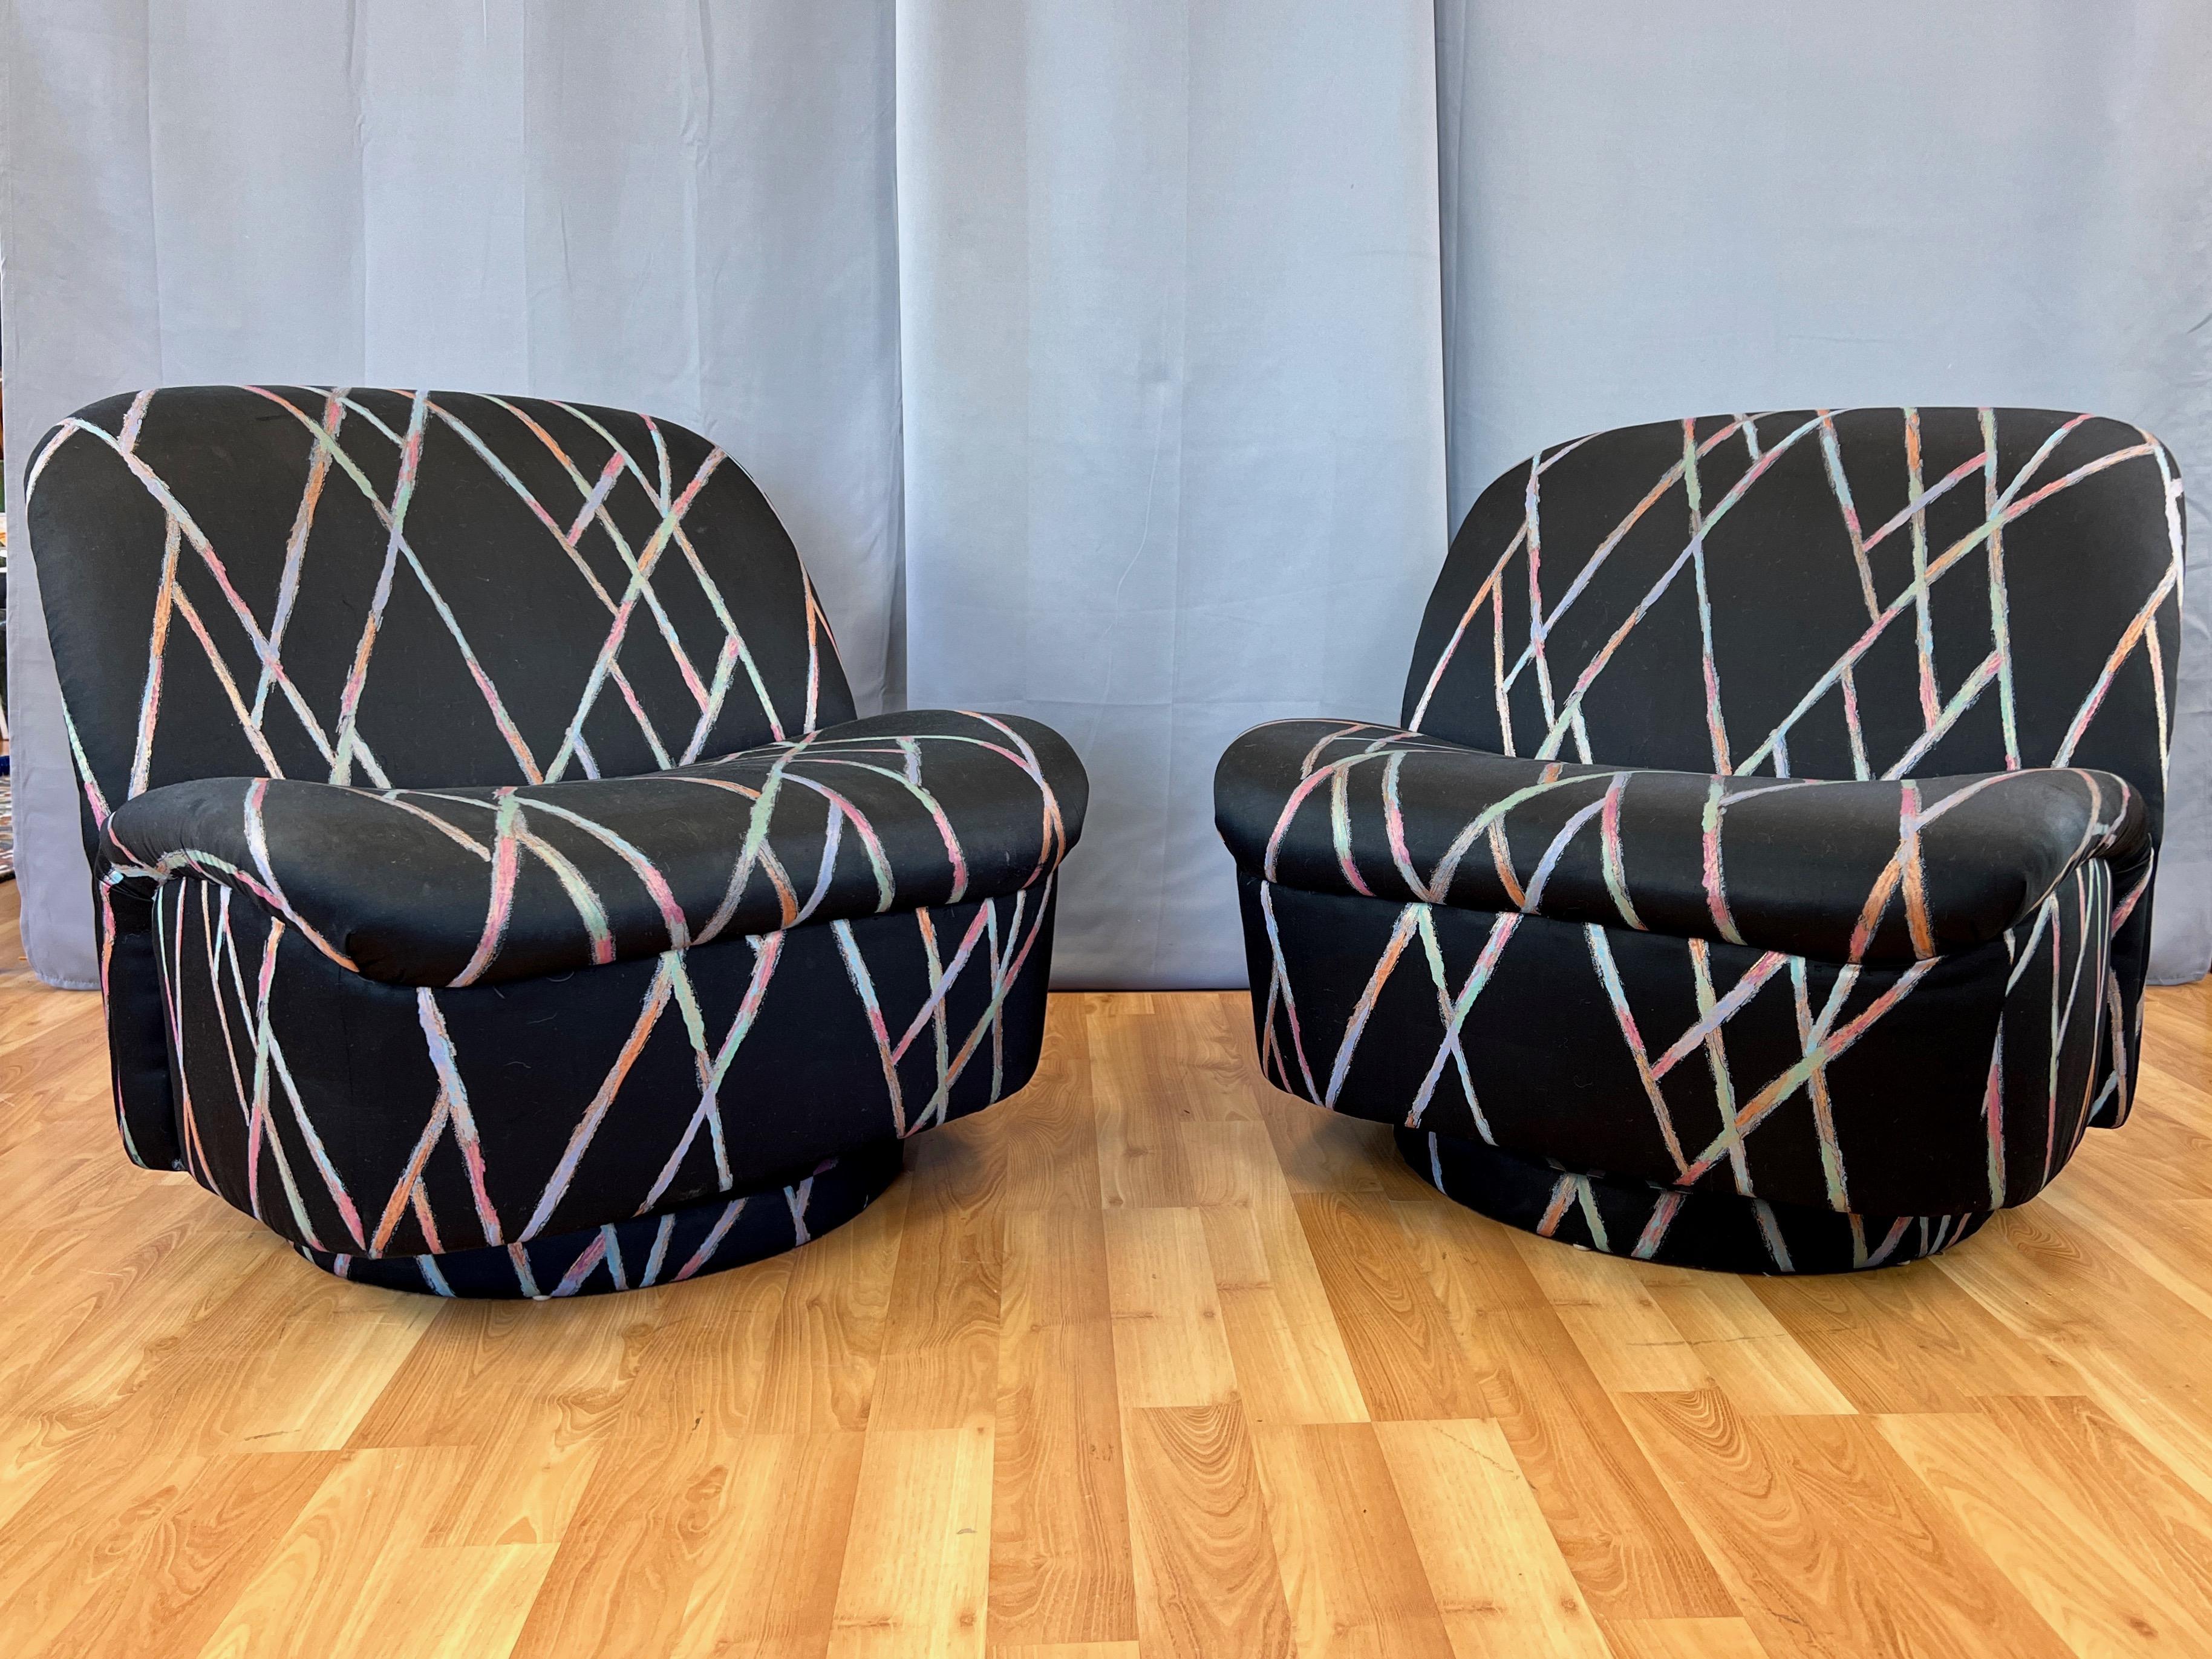 A fabulous pair of 1980s swiveling & tilting slipper-style lounge chairs in their original upholstery by Directional, who referred to the design in original advertisements as a “swivel lip chair”.

Generously-sized and inviting slipper seat with